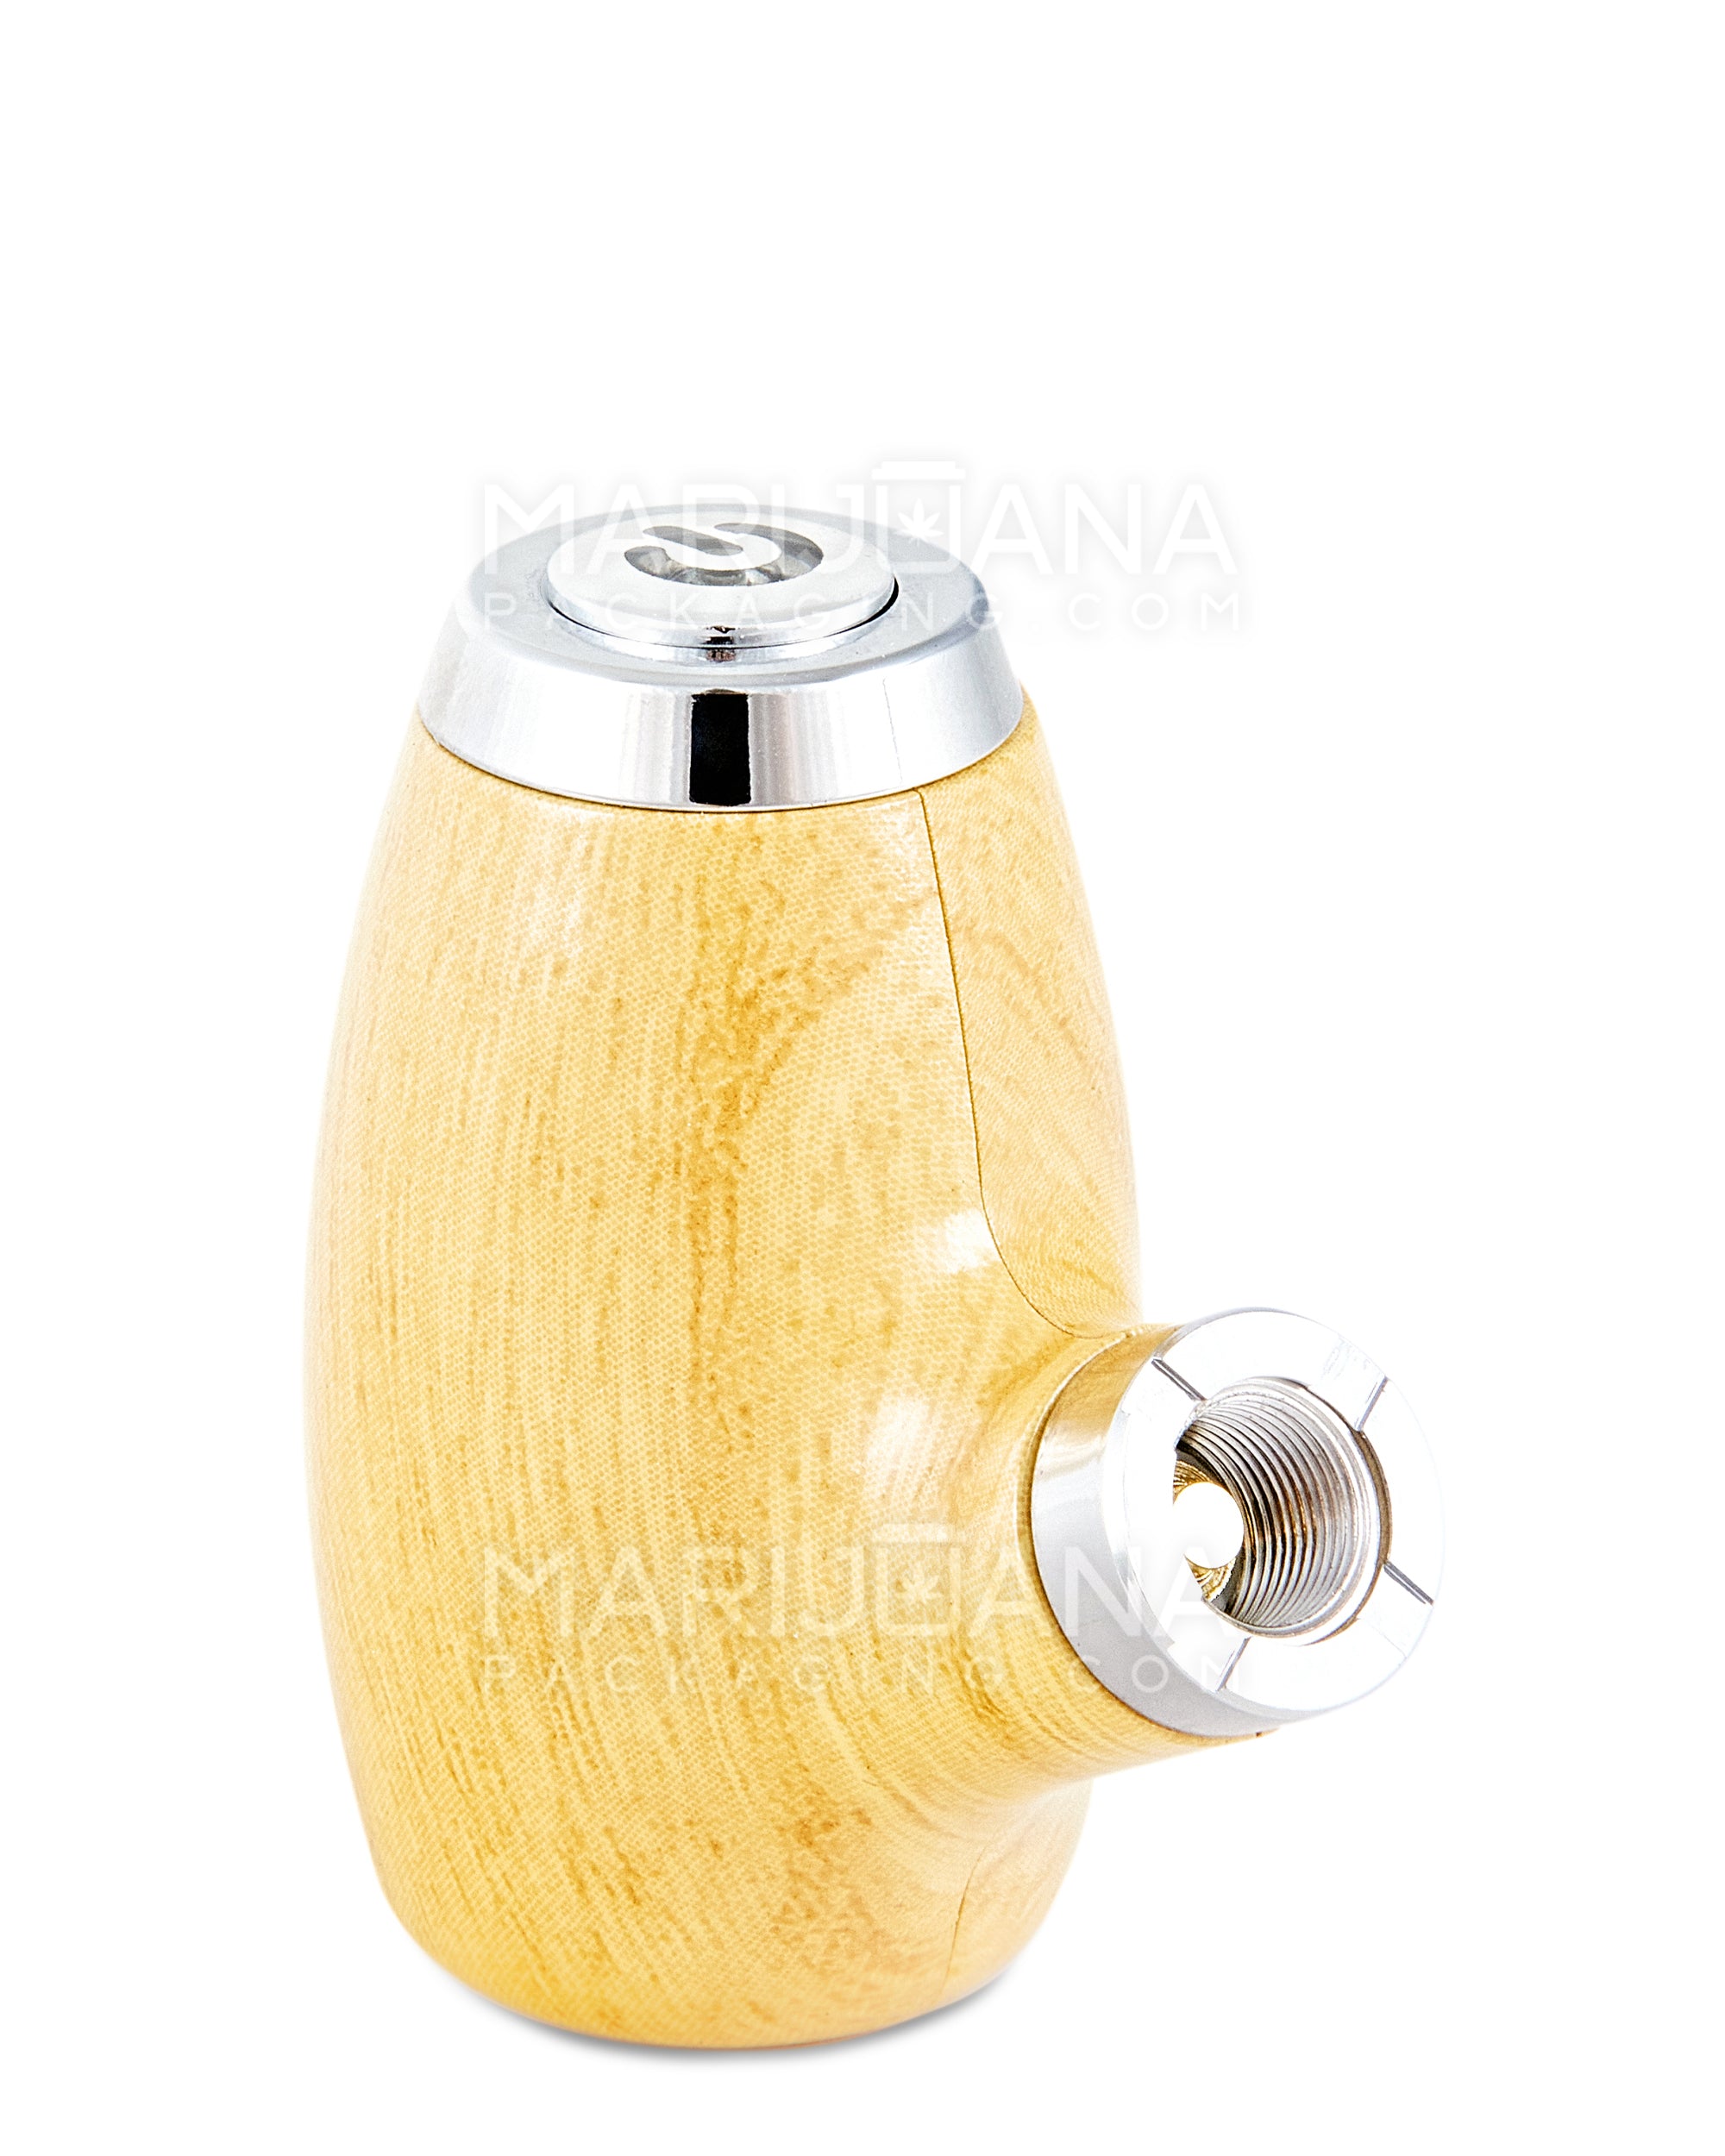 Variable Voltage "Old Man's Pipe" Shaped Vape Cartridge Battery | 900mah - Spruce Wood - 510 Thread - 4